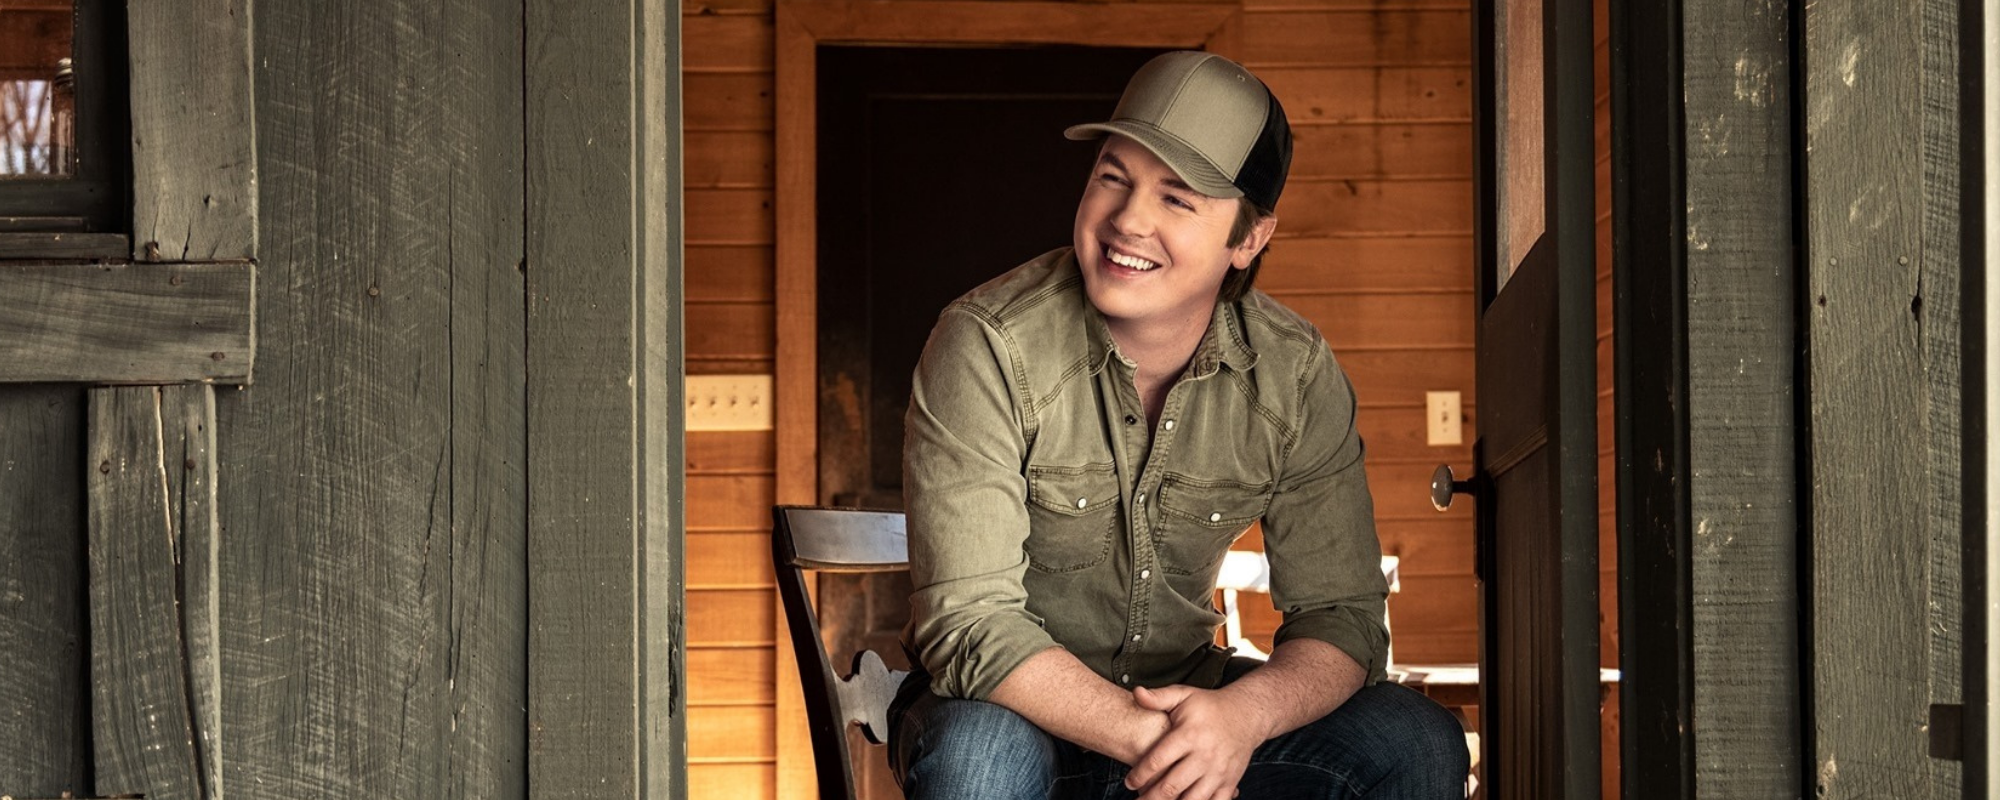 Travis Denning Exhibits Unexpected Strengths on New EP ‘Dirt Road Down’